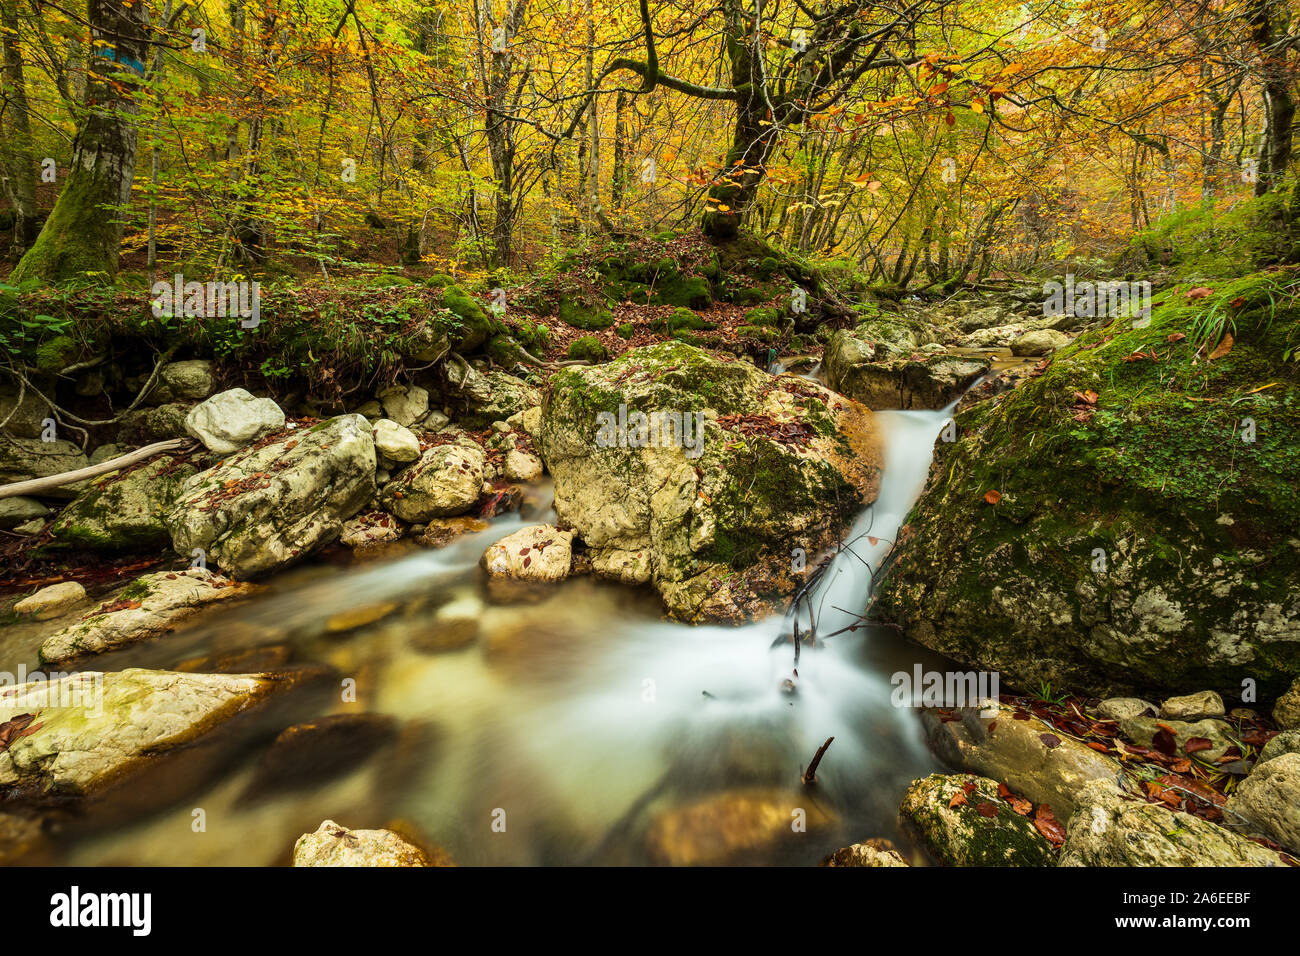 Small river flowing through rocks and stones in colorful autumn forest, long exposure, Natural reserve Camosciara, Abruzzo, Italy Stock Photo